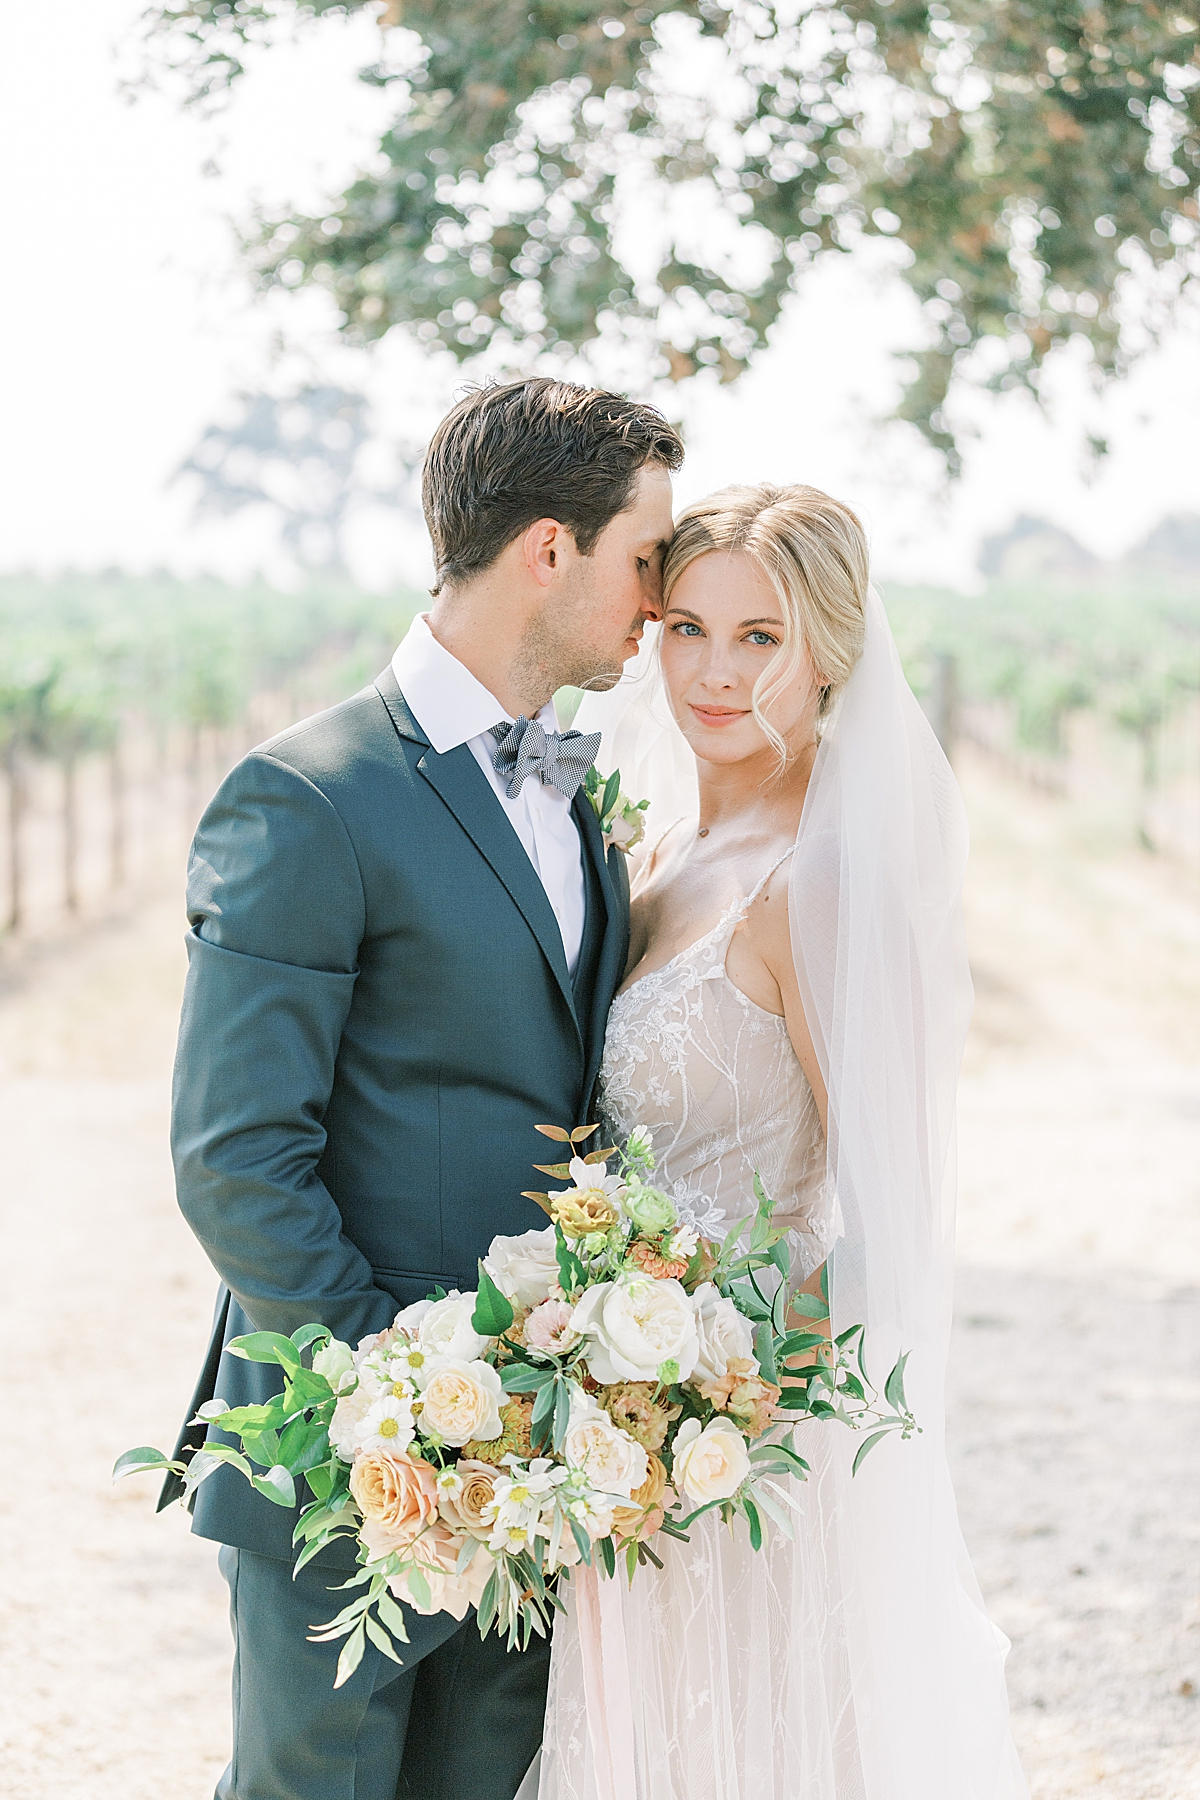 Susan Dunne is one of our favorite wedding planners near Santa Barbara, California